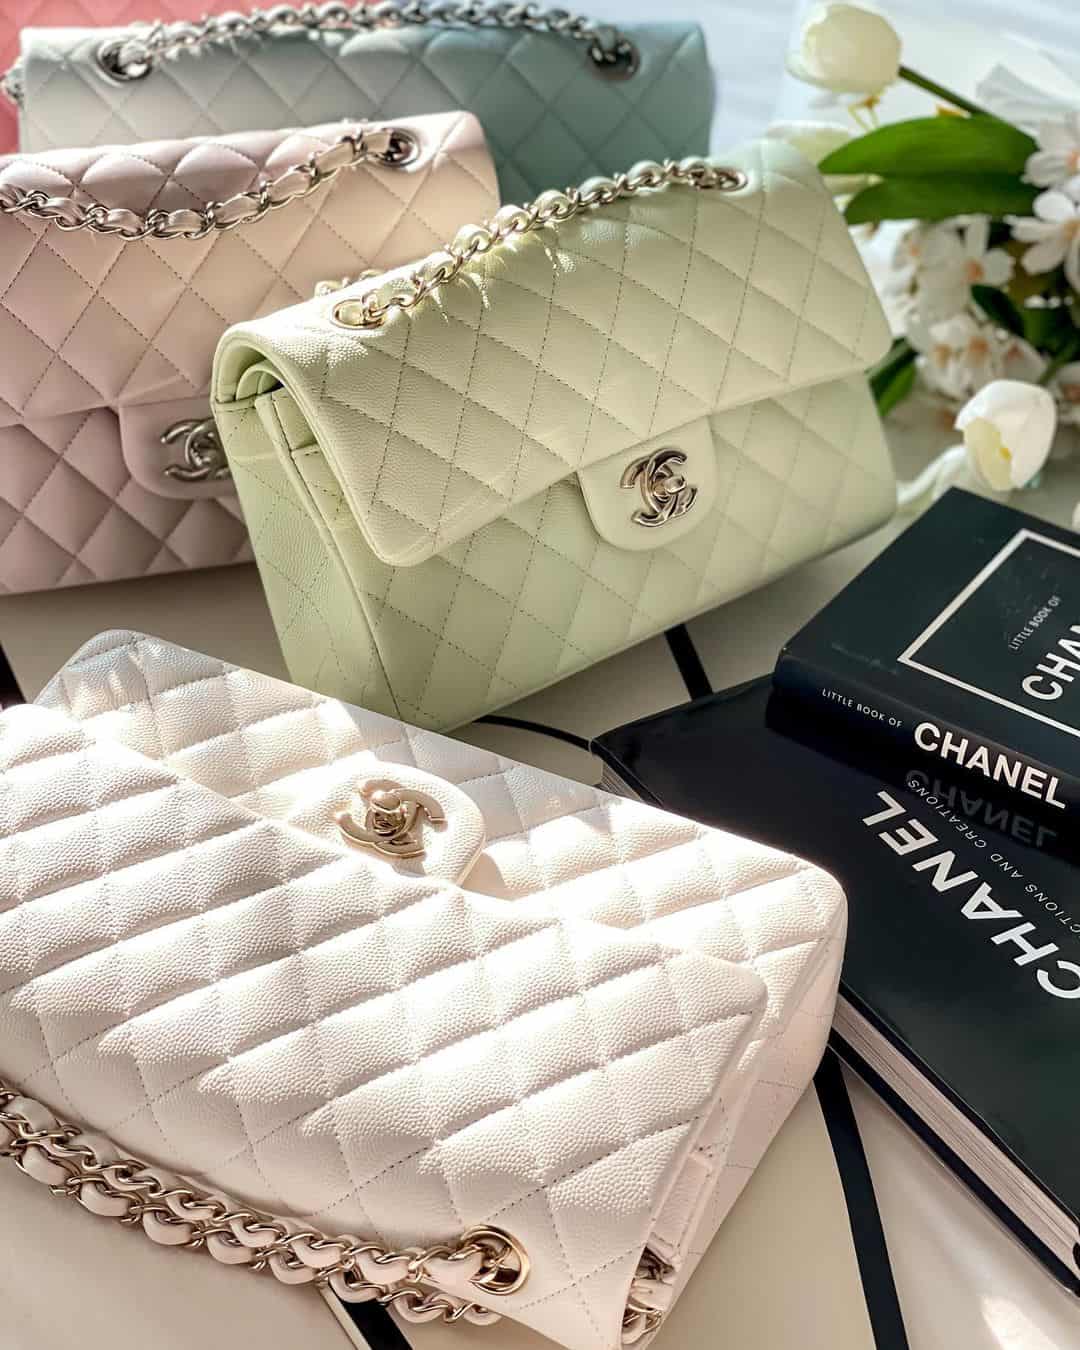 See Photos and Prices of 95 Brand New Chanel Bags from Metiers dArt 2018  in Boutiques Now  PurseBlog